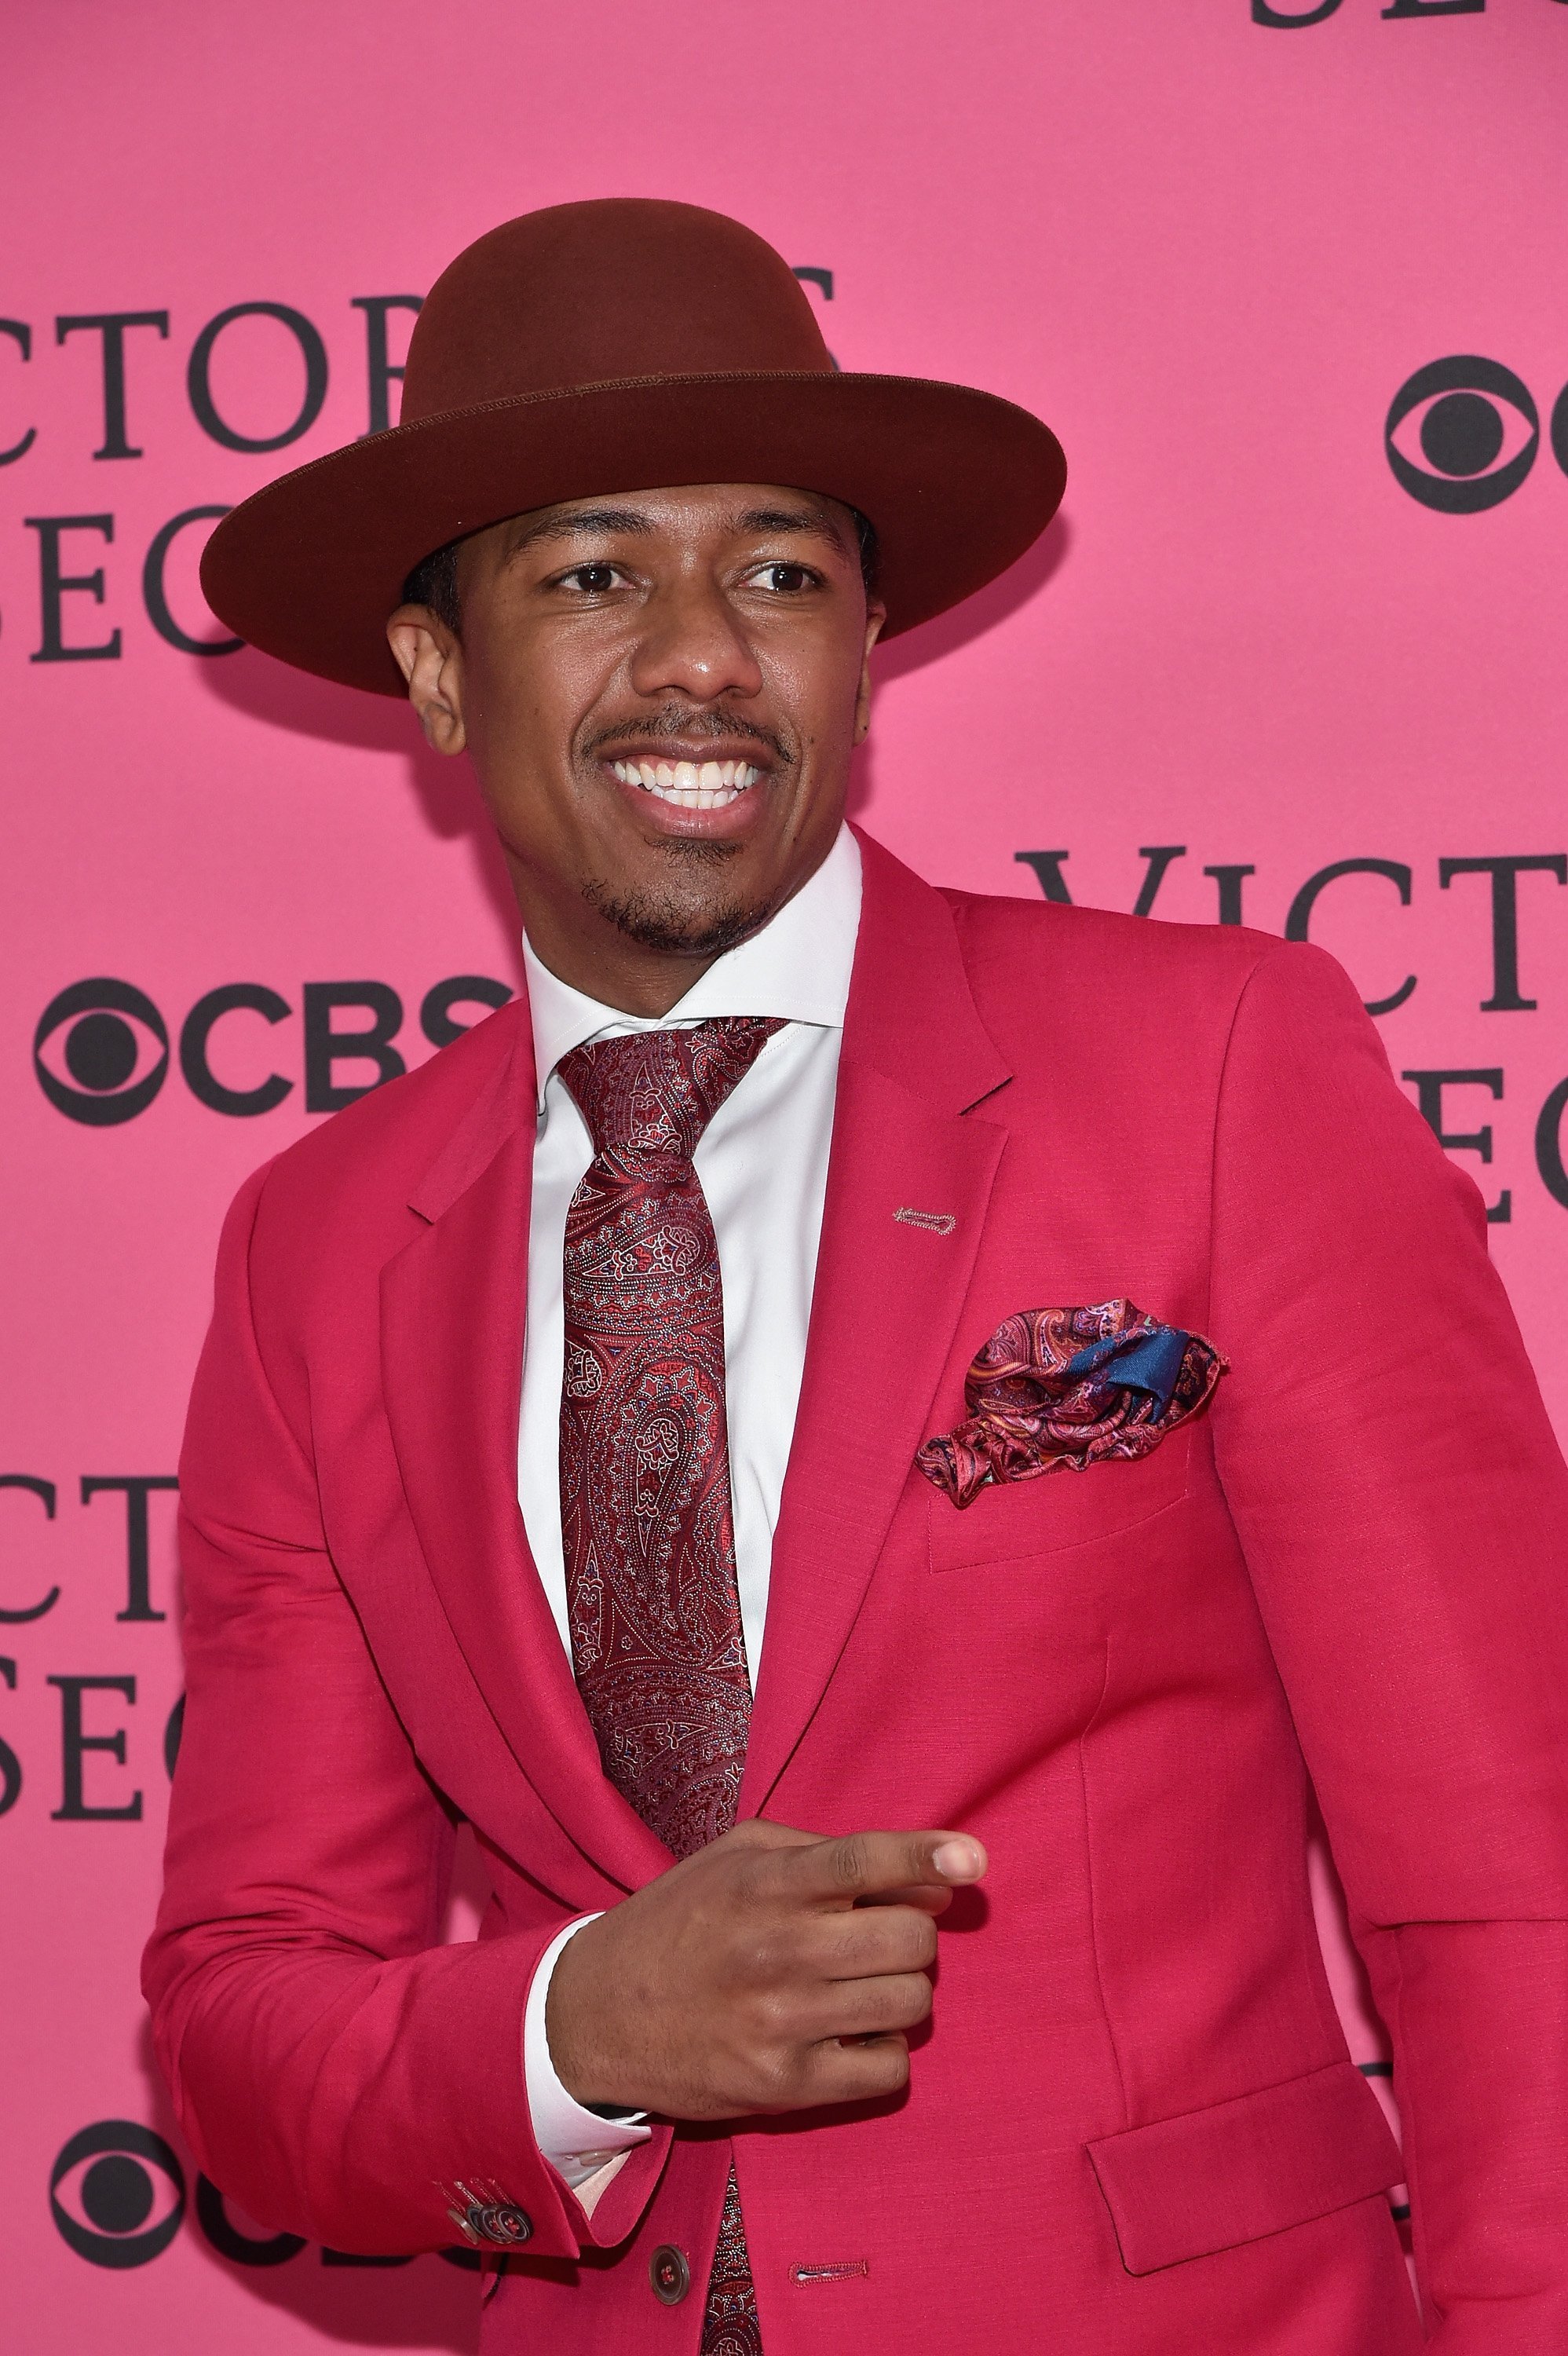 Father-of-three Nick Cannon at the 2015 Victoria's Secret Fashion Show. | Photo: Getty Images